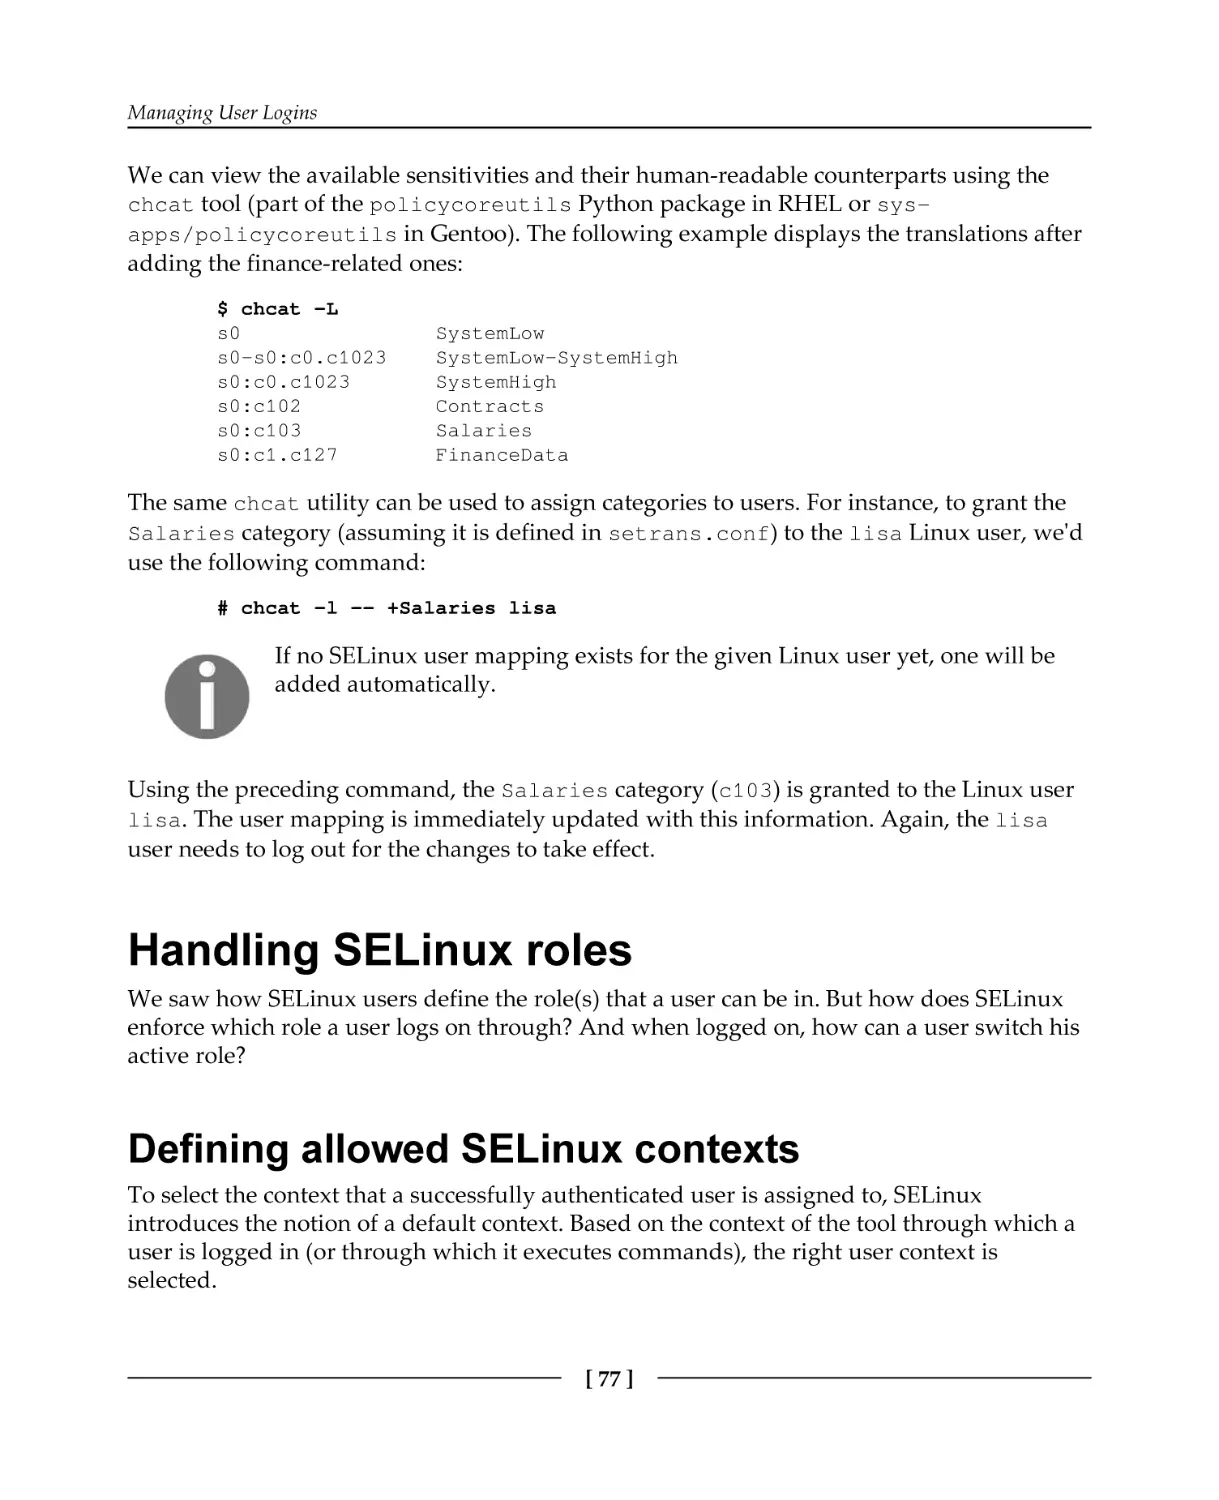 Handling SELinux roles
Defining allowed SELinux contexts